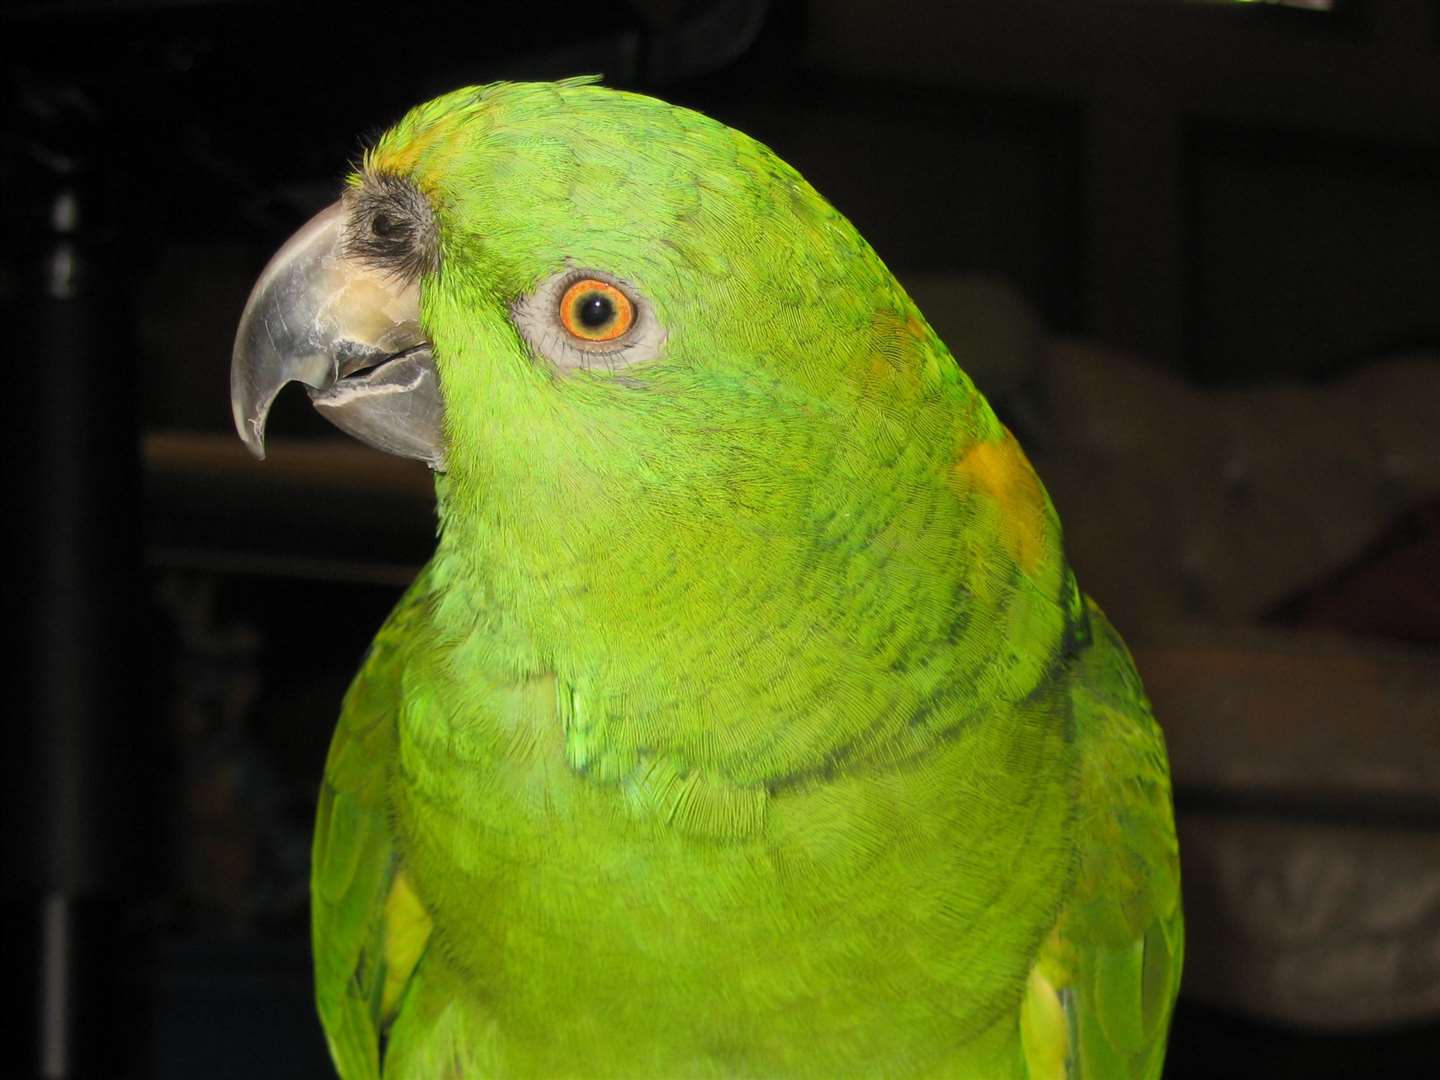 There was even a complaint about parrot noise